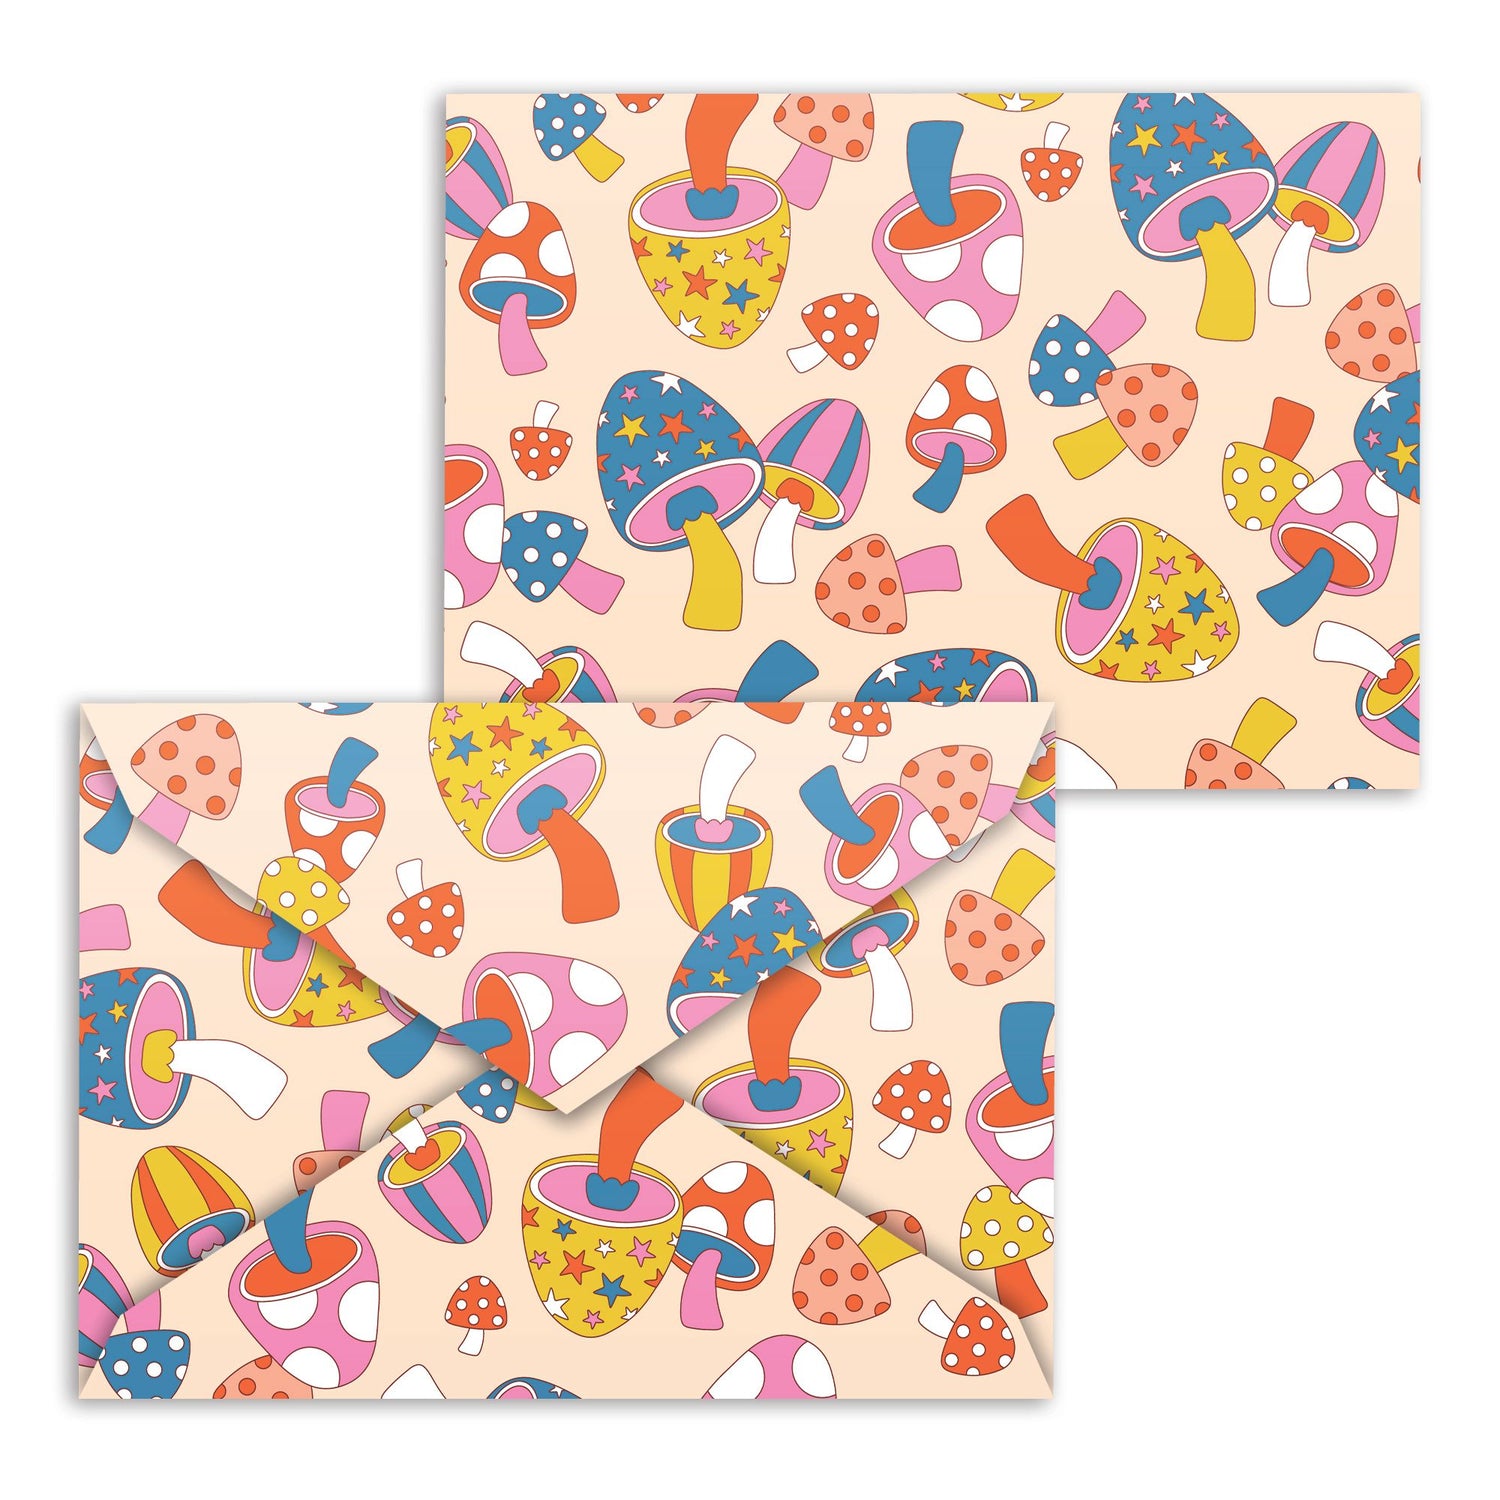 Patterns A-Go-Go Notecard Pack (12ct)